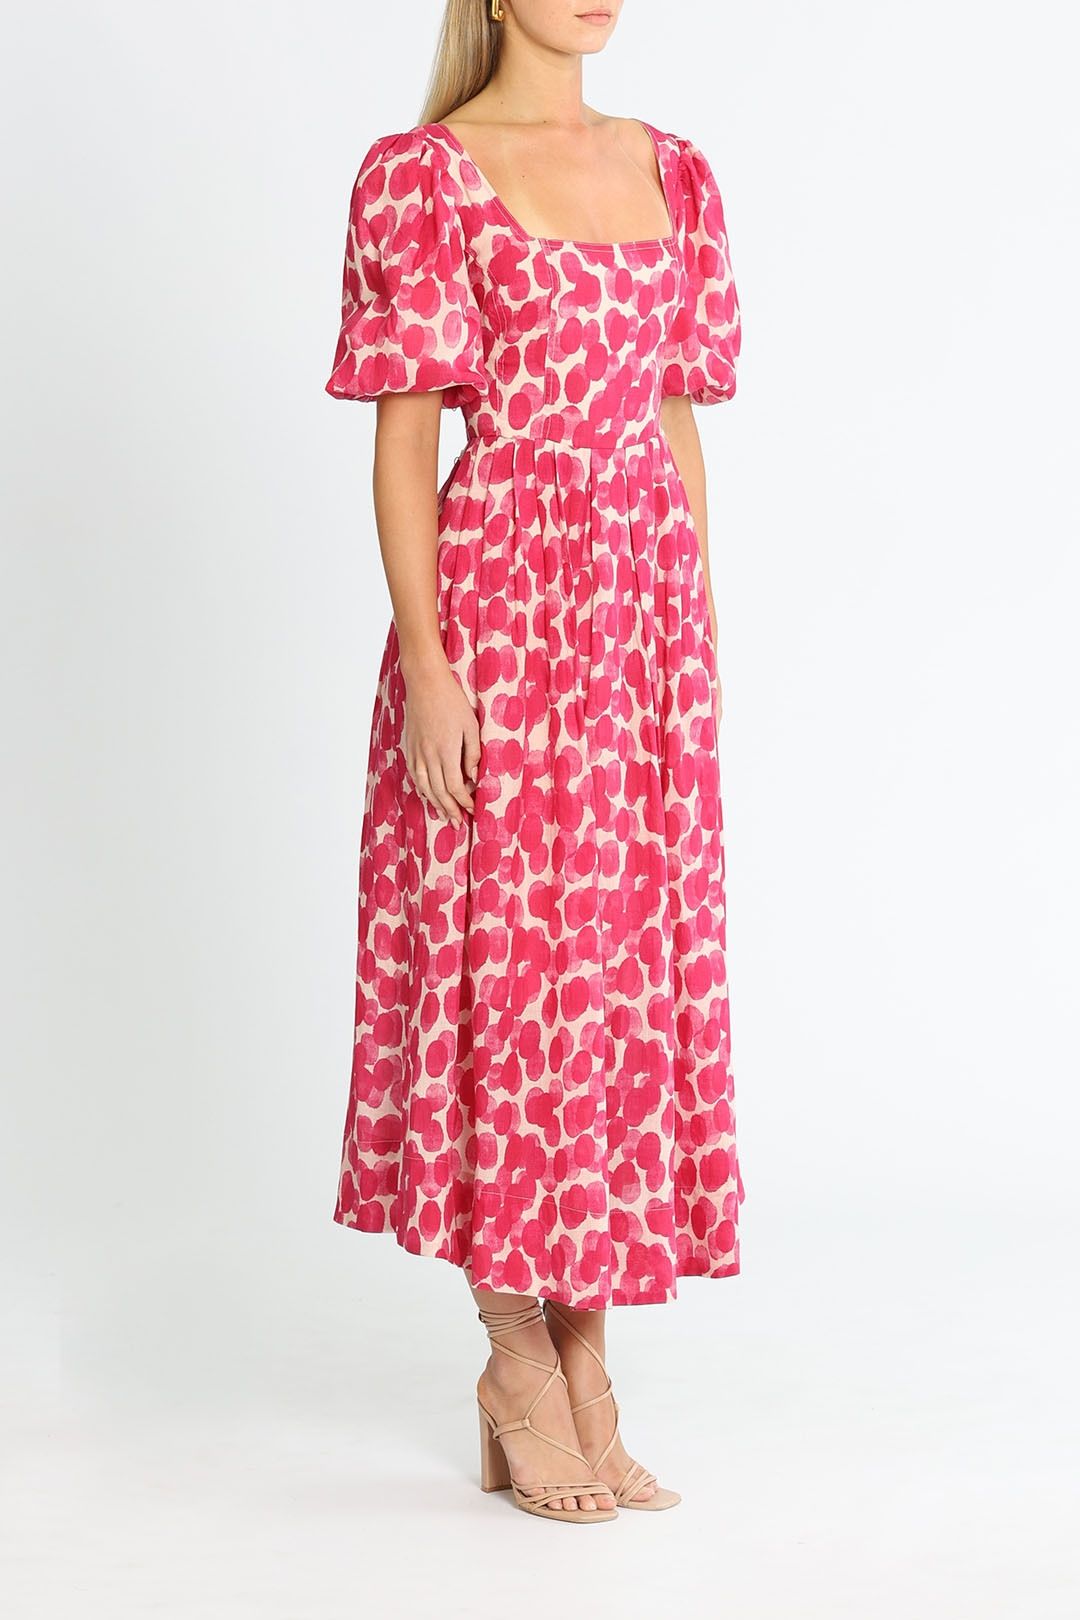 Ministry of Style Mottled Blossoms Midi Dress Balloon Sleeves